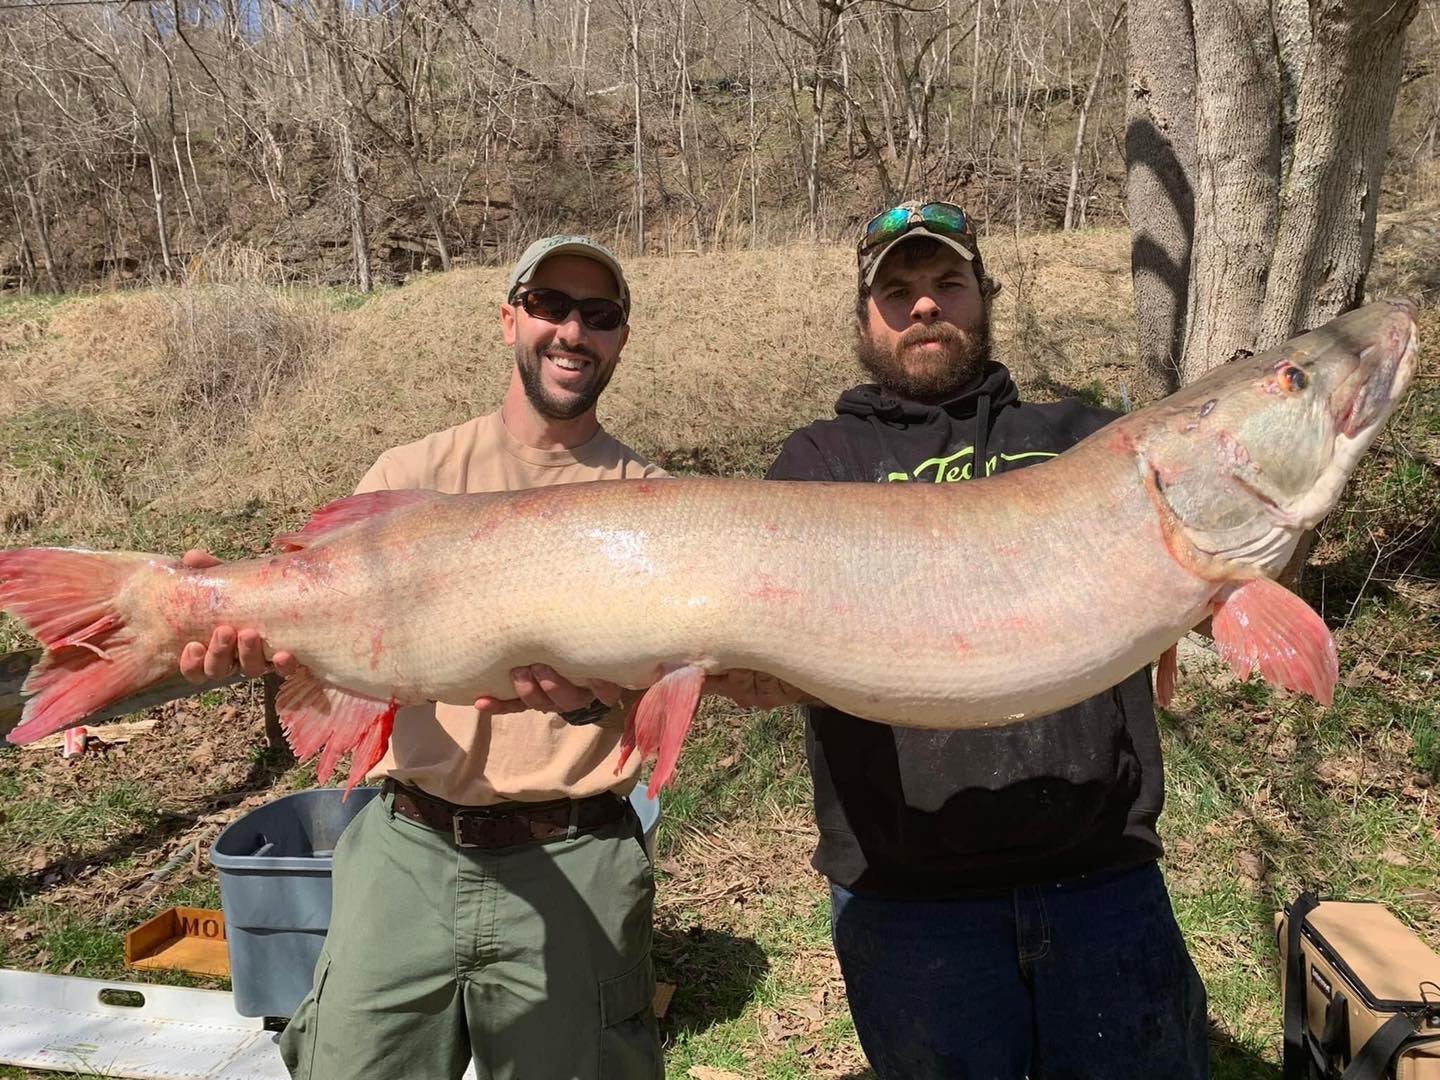 Luke King (right) shattered the W. Virginia muskie record with this 51-pound giant. The fish was released. 